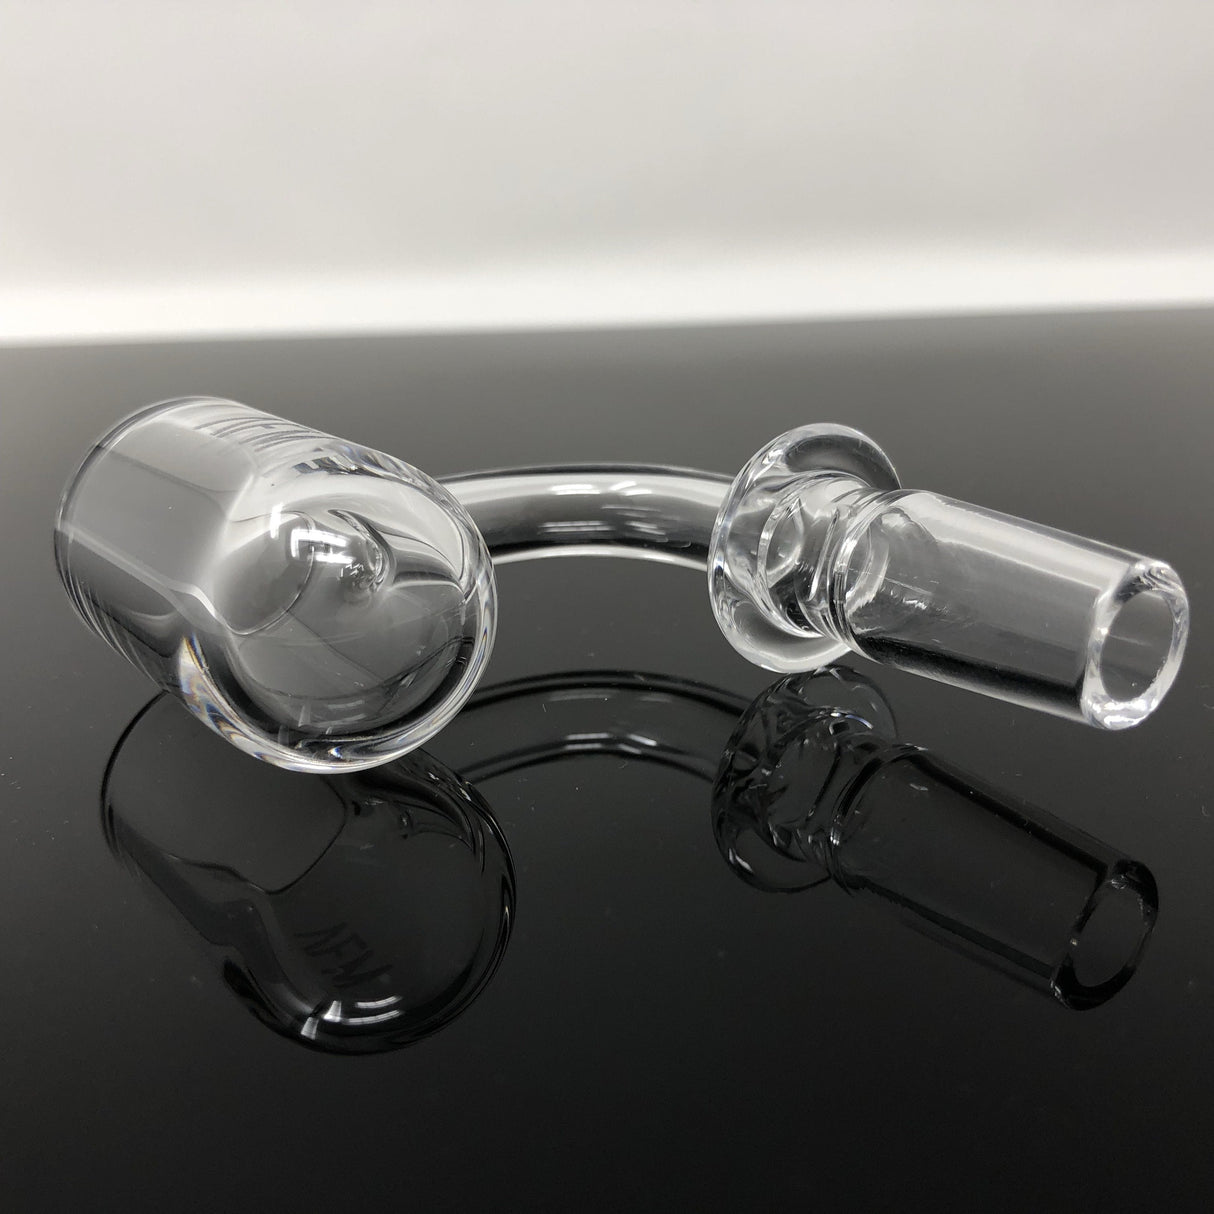 AFM Quartz Round Bottom Banger, 3mm thick, 25mm wide for Dab Rigs, side angle on reflective surface